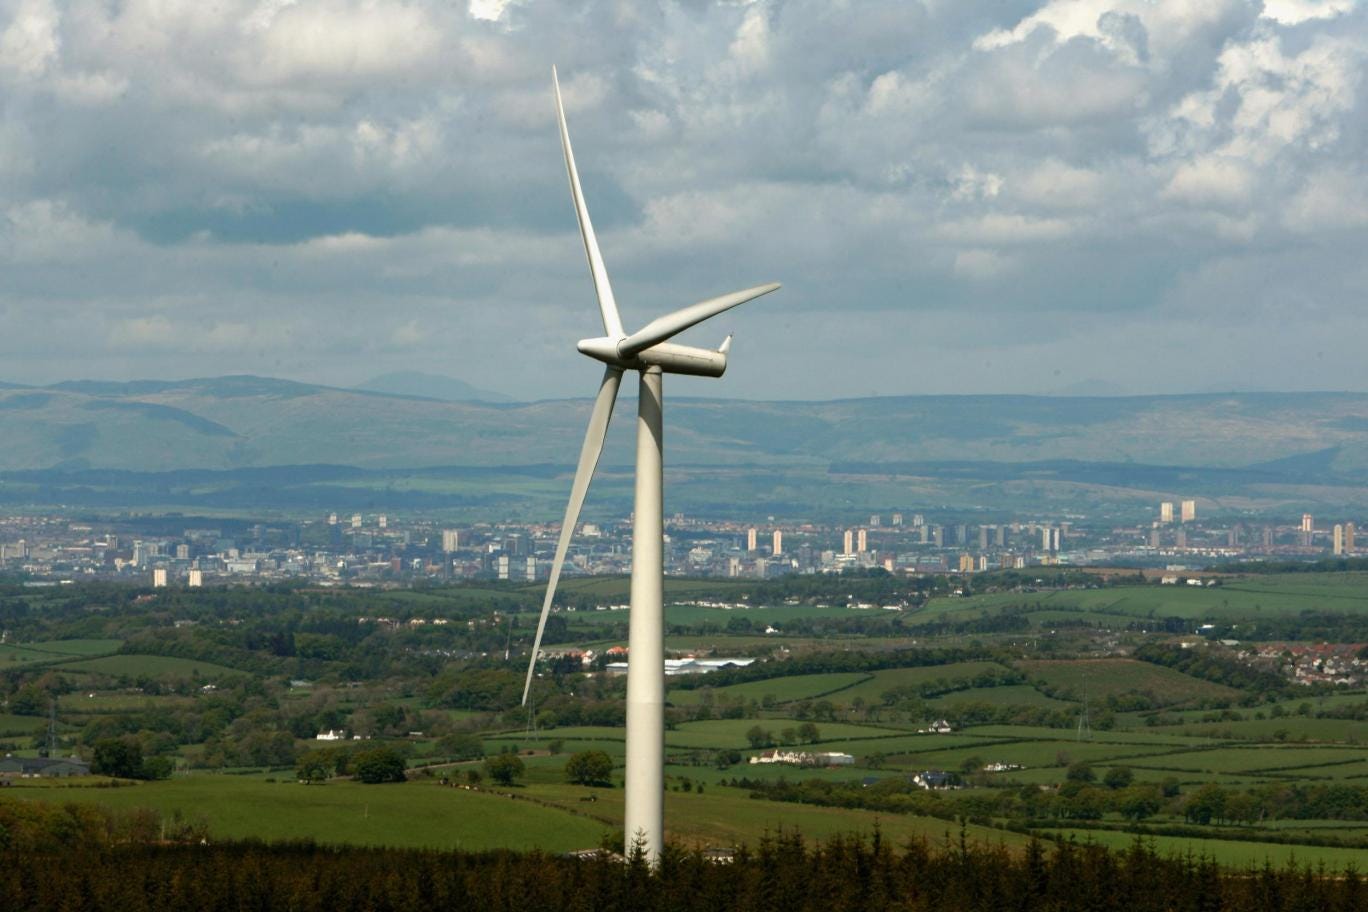 A wind turbine stands at Whitelee Wind Farm, the biggest in the UK